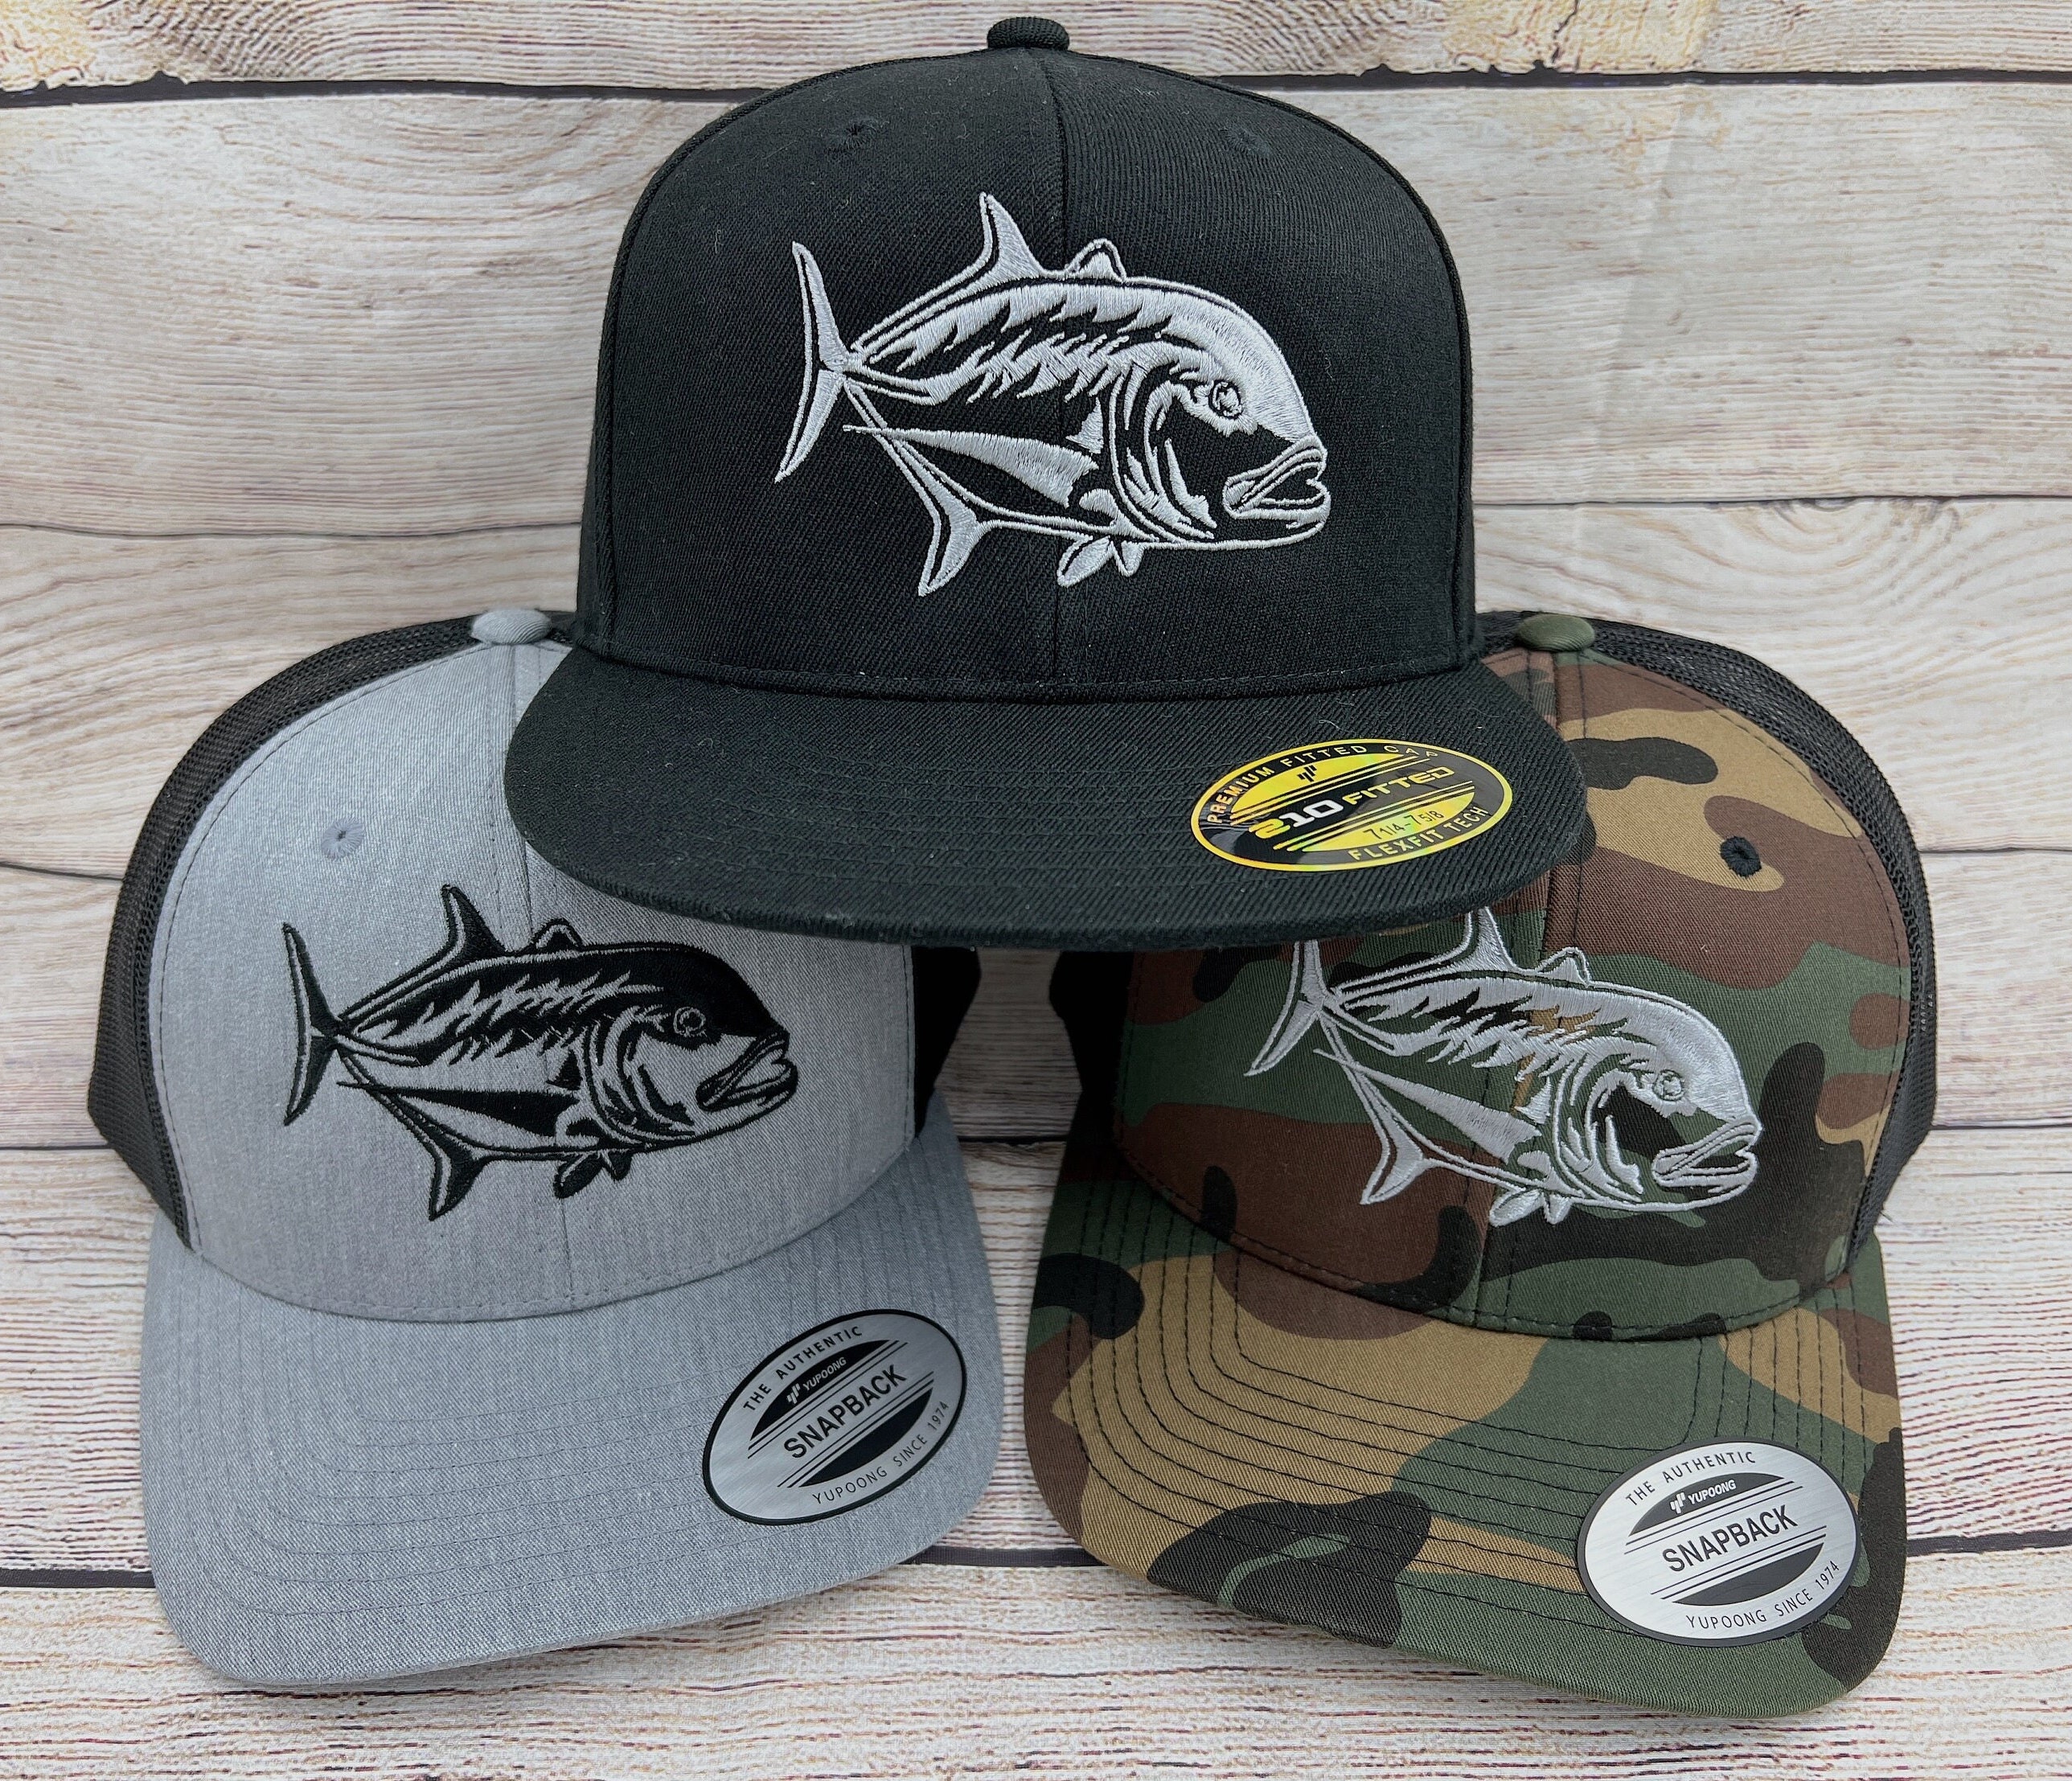 Ulua Personalized Embroidered Hat, Custom Hat, Fitted,Snapback,Baseball Cap, Trucker, Multiple Color